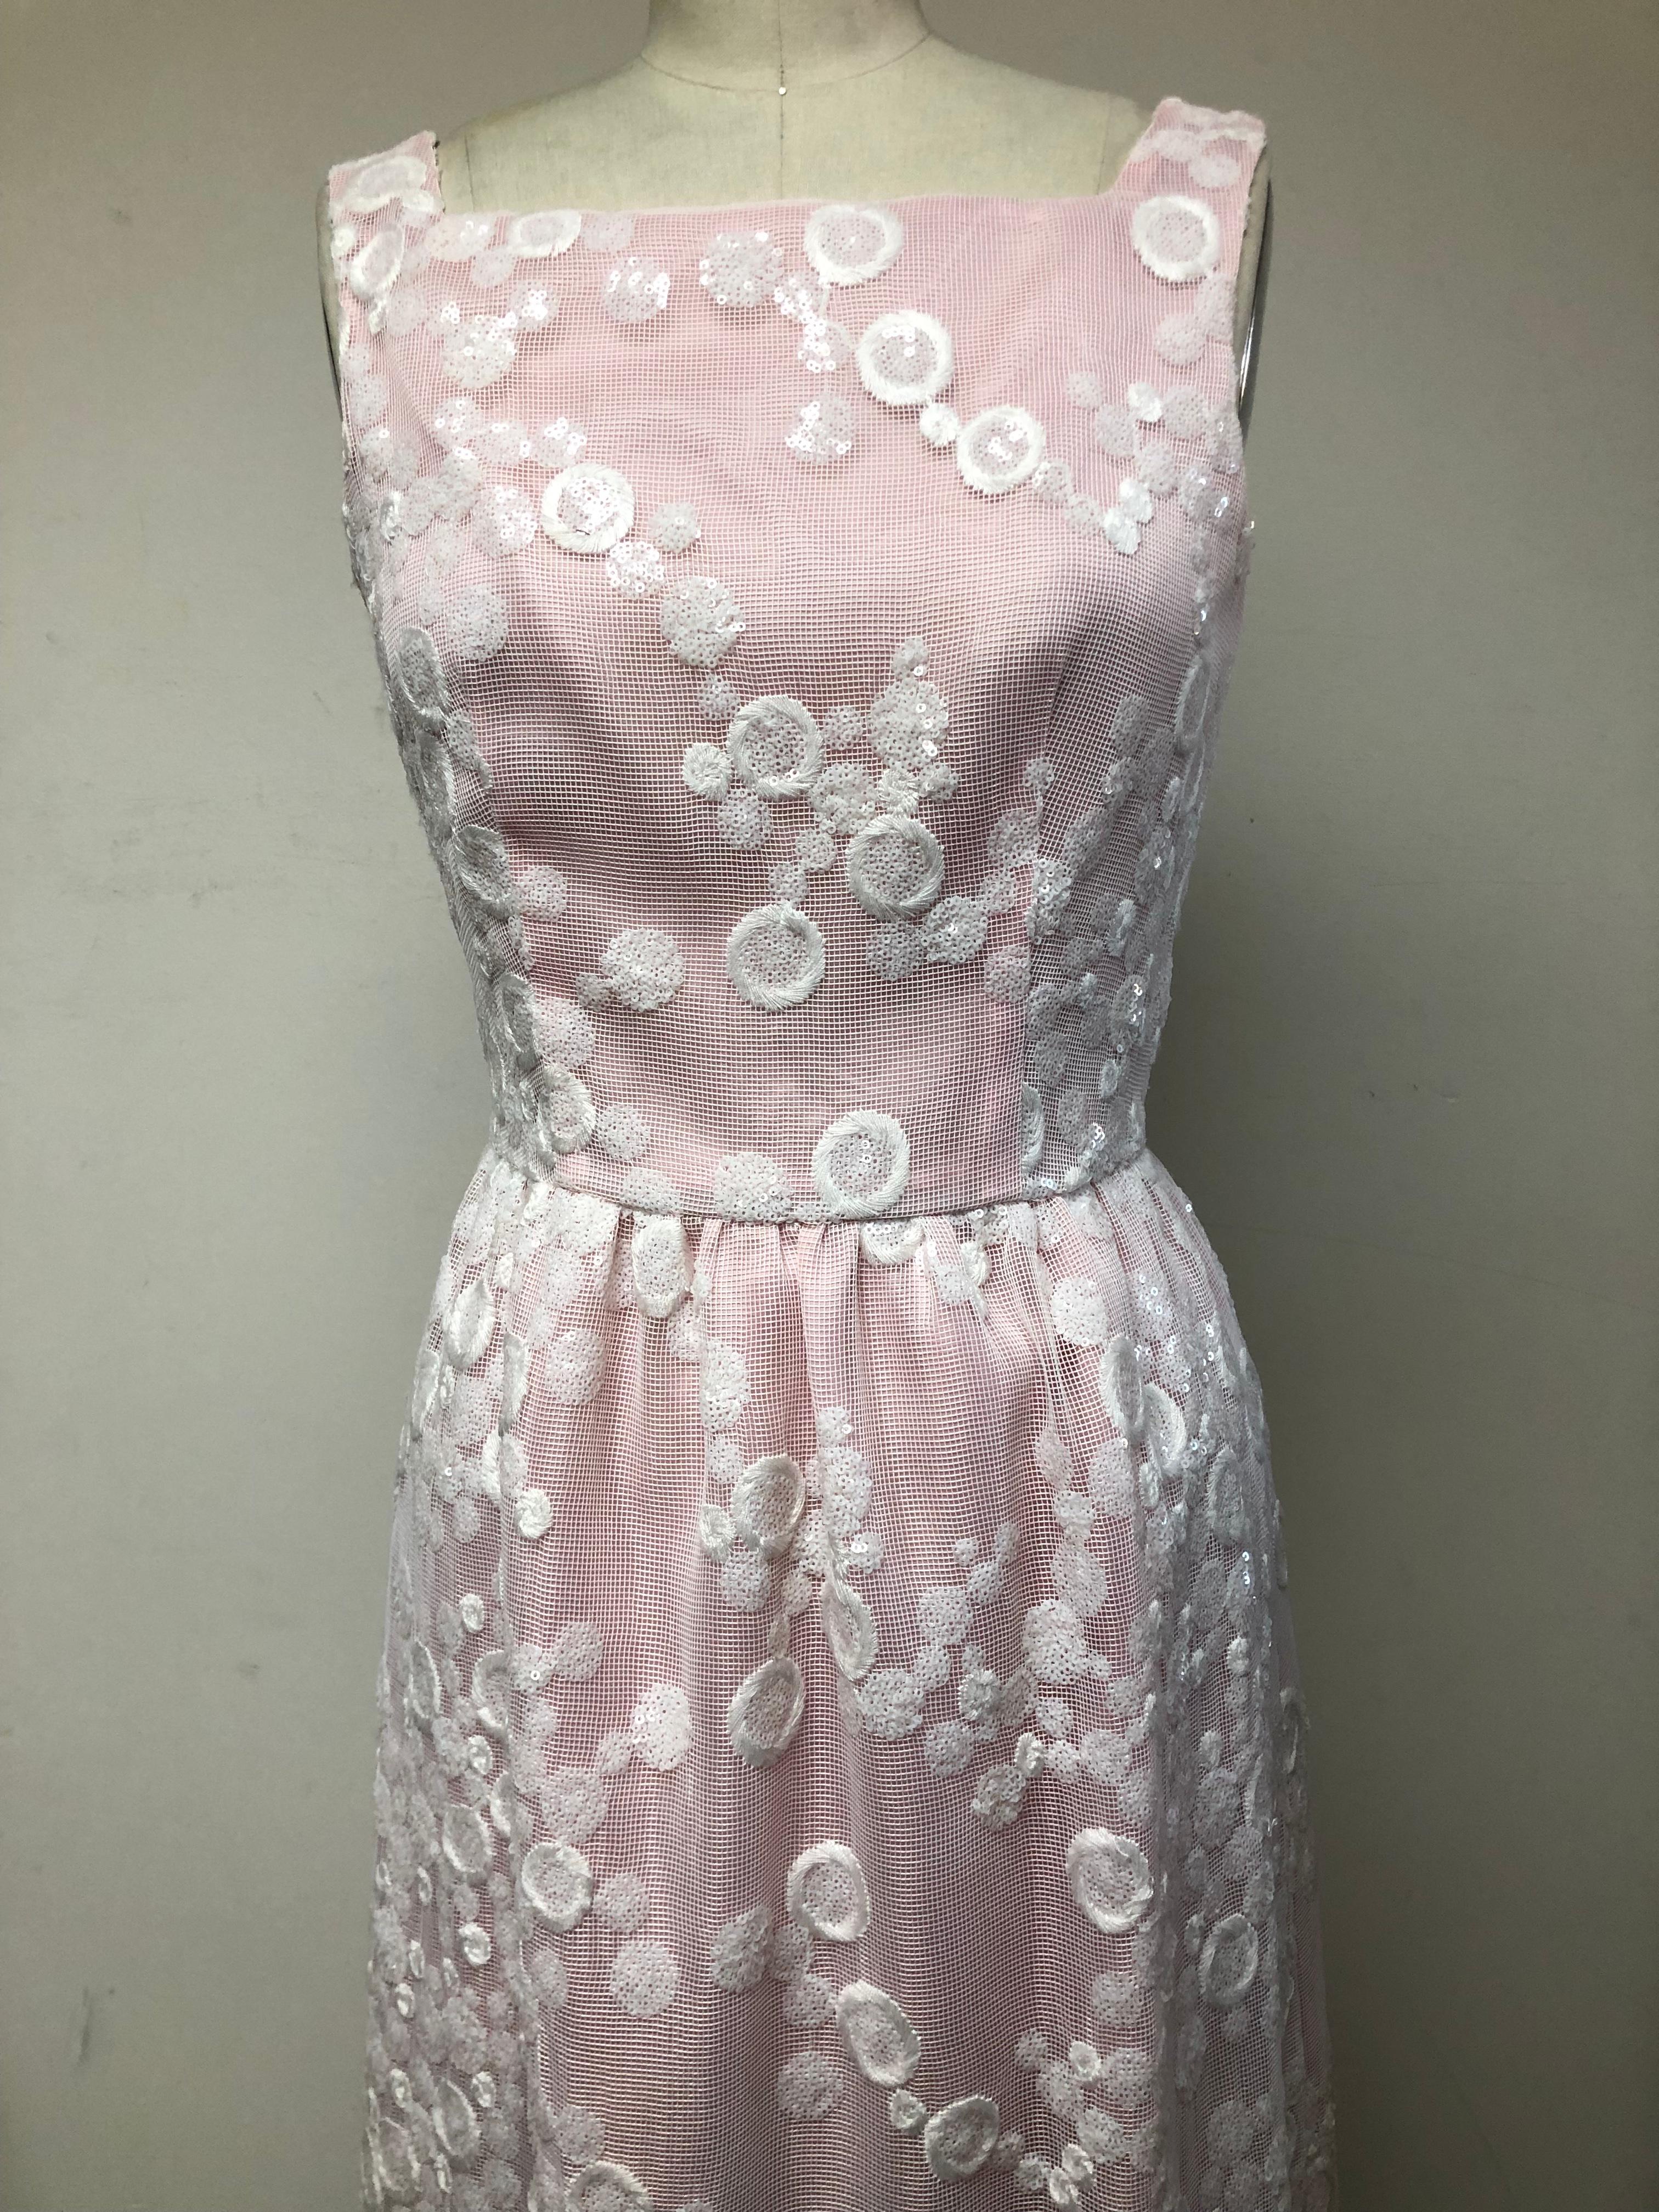 Square Neck Gown with softly gathered skirt lined in the palest pink silk organza overlayed with white mesh embroidery and embellished with sequins. A charming dress perfect for a wedding! The lovely coloration and sparkle go from day into evening.